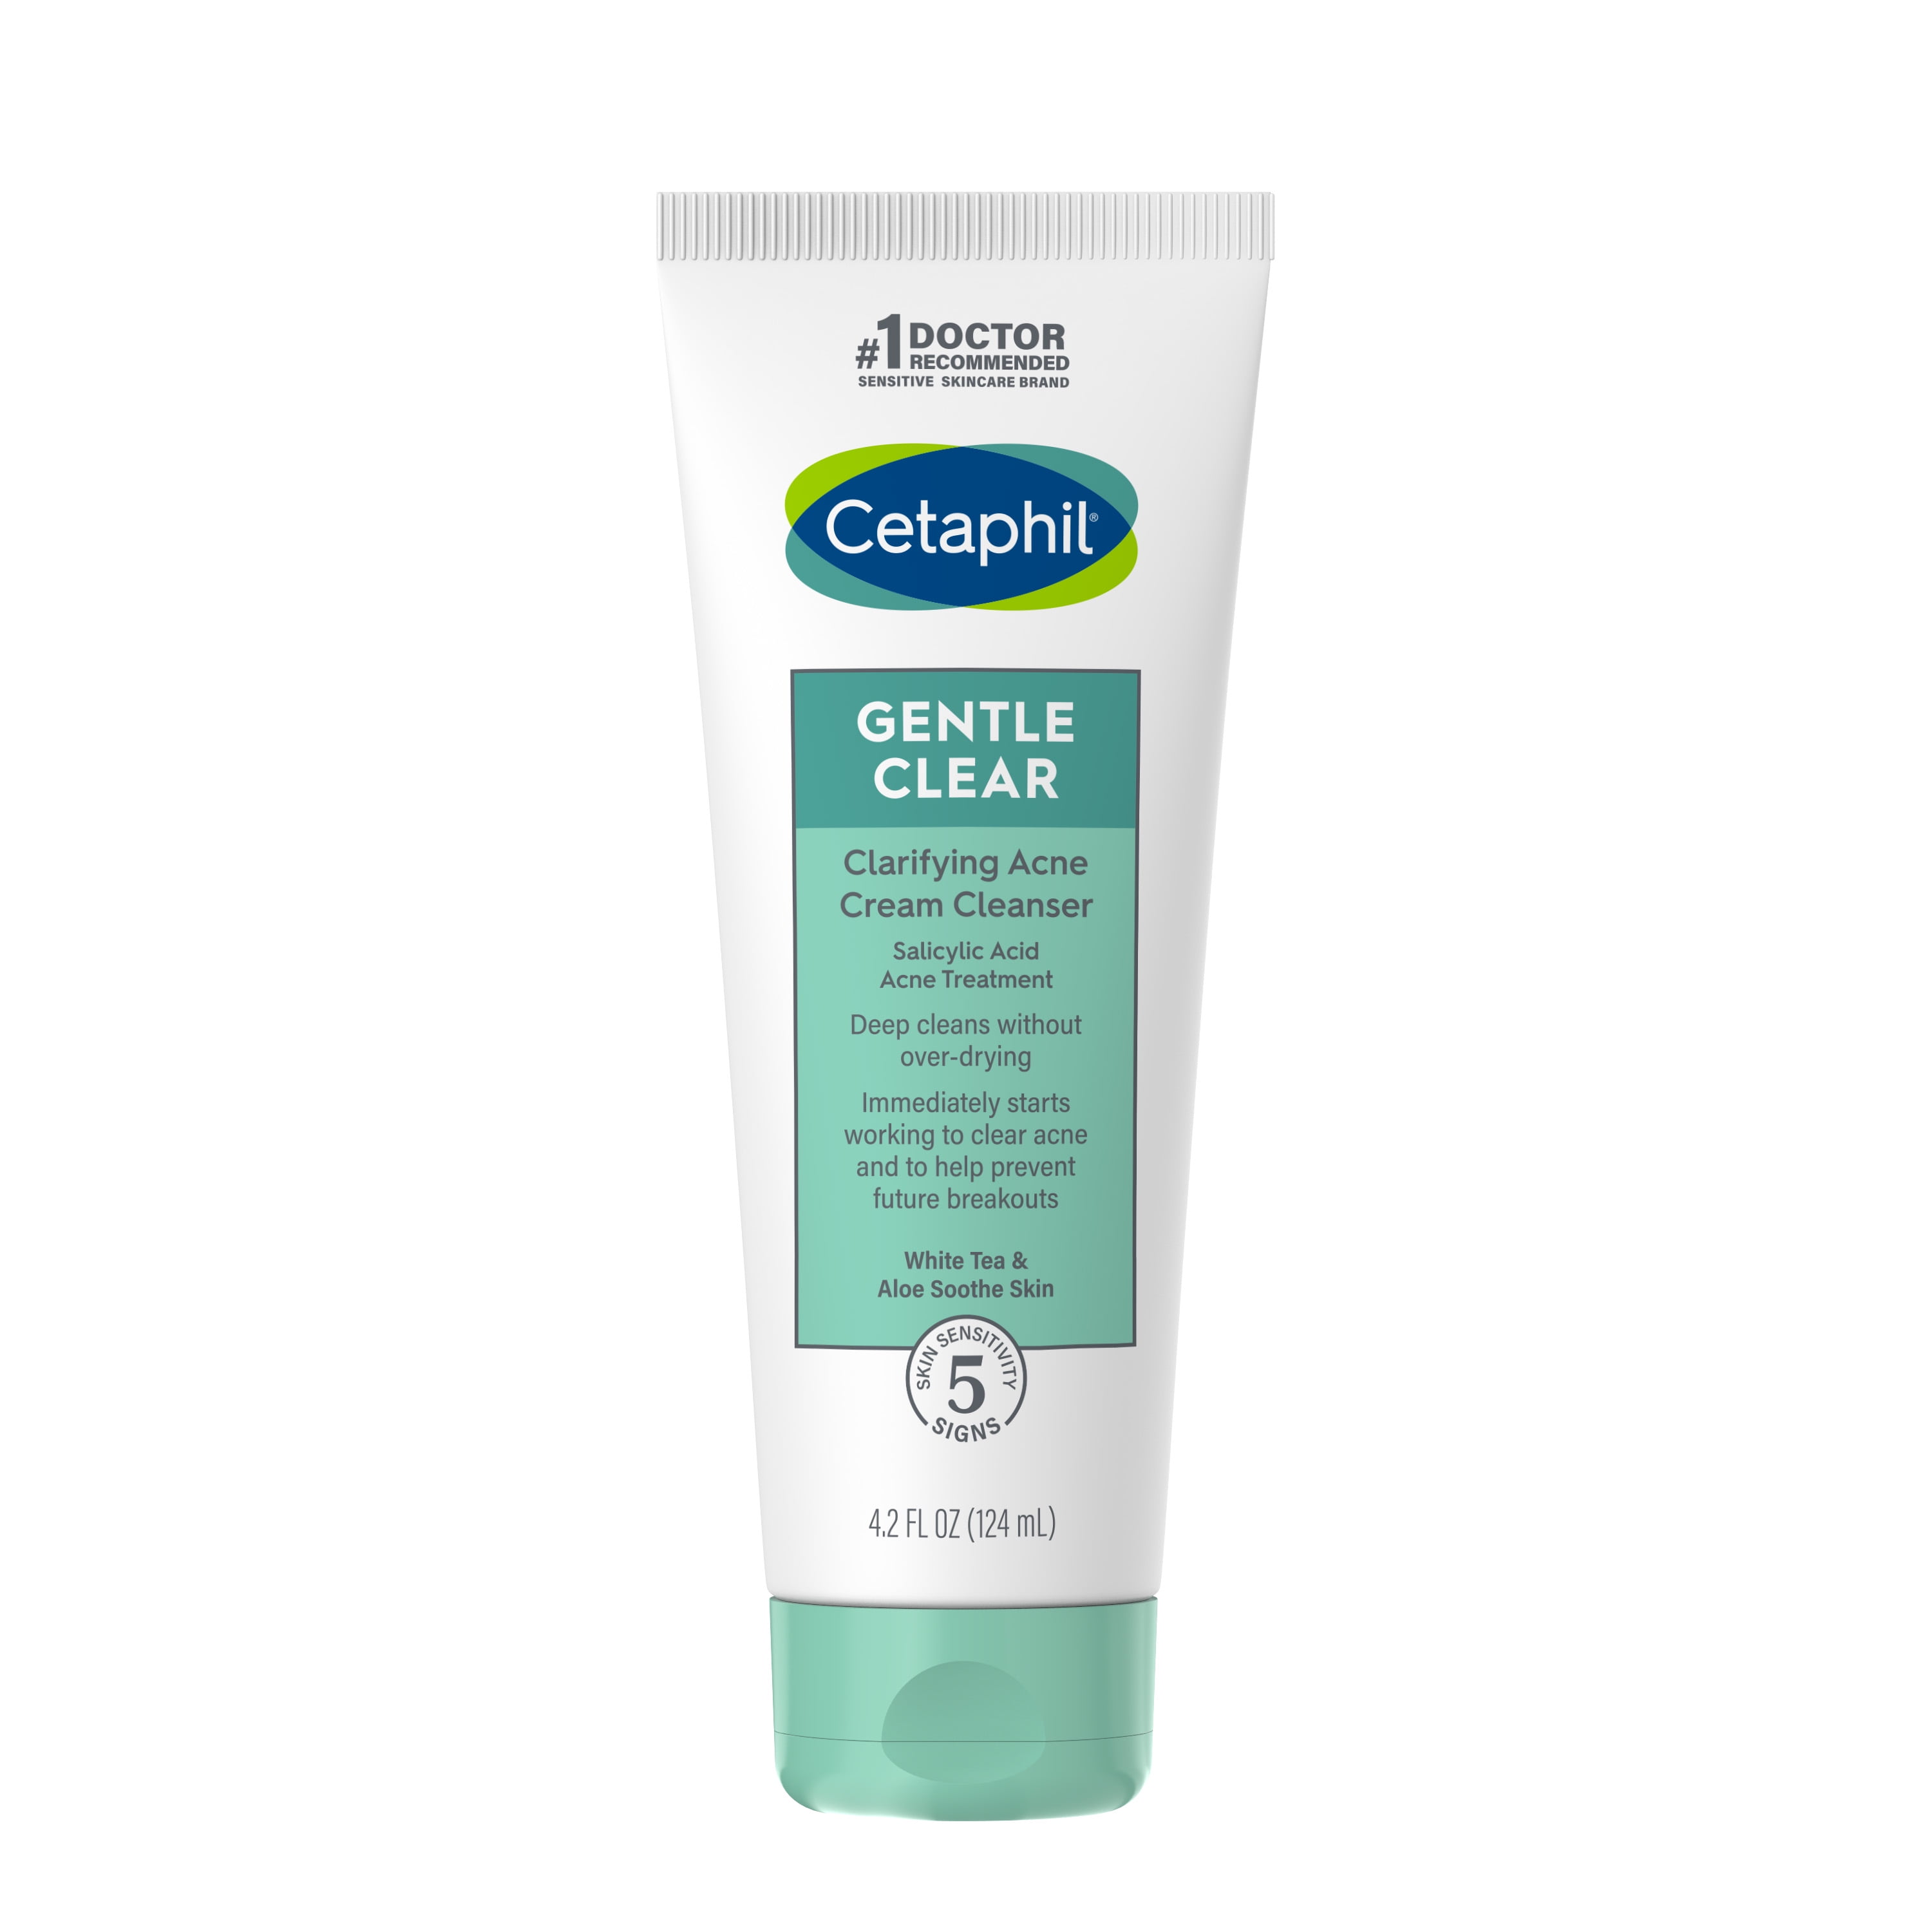 Cetaphil Gentle Clear Clarifying Acne Cream Cleanser with 2% Salicylic Acid, Deep Cleans & Treats Acne Prone Skin, Skin Care for Sensitive Skin, 4.2oz